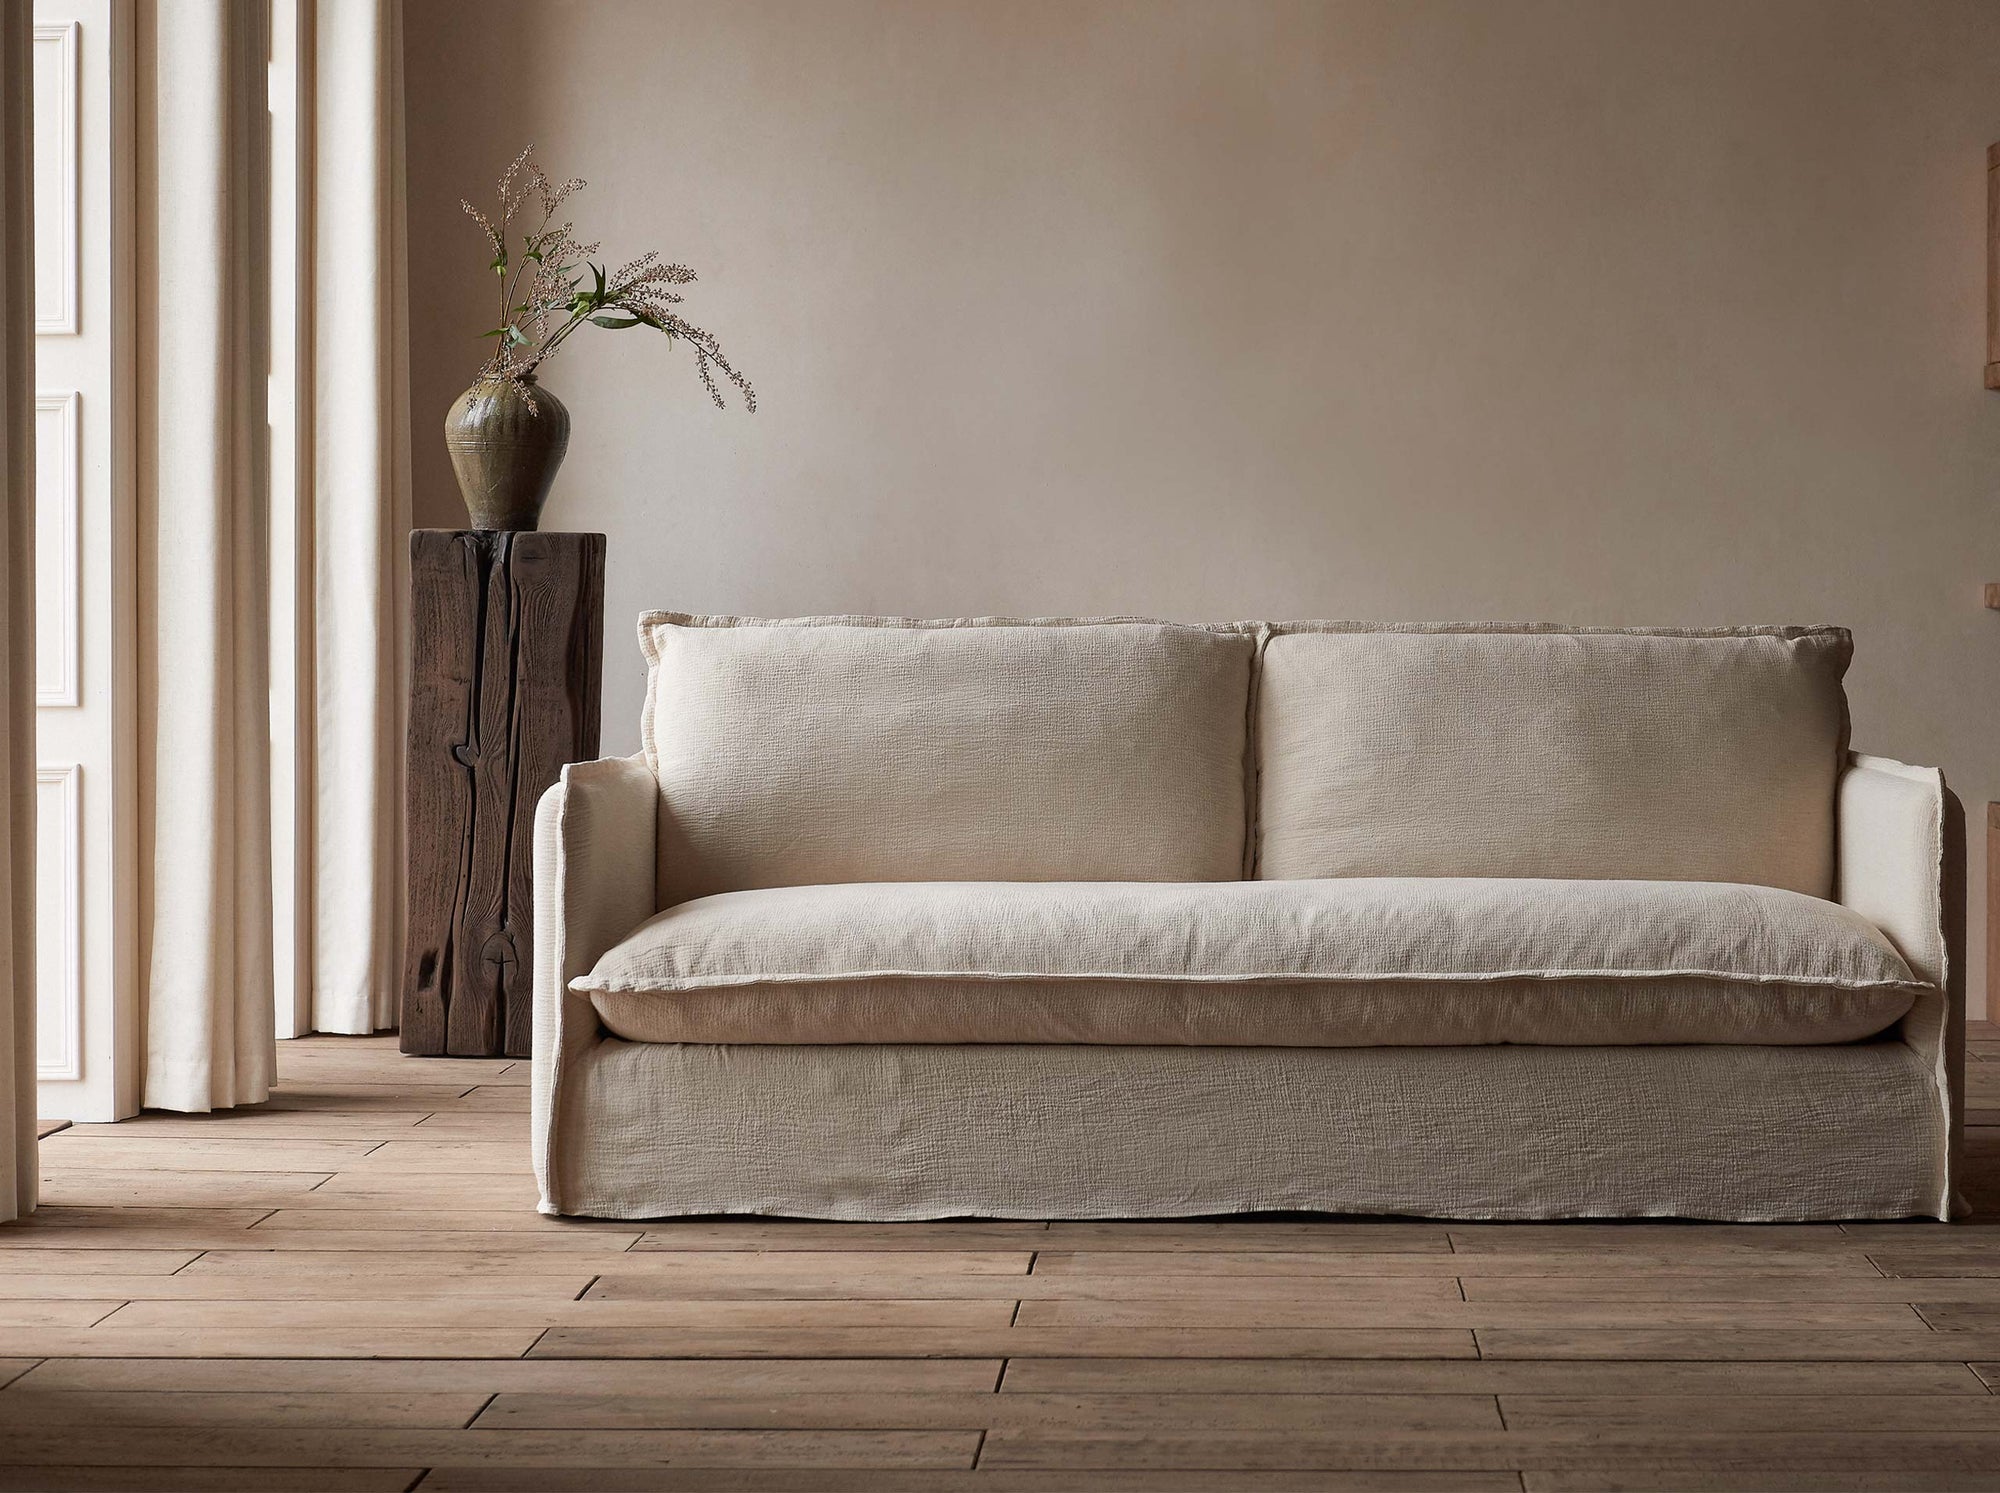 Neva 84" Sofa in Corn Silk, a light beige Washed Cotton Linen, placed in a softly lit room with a vase of flowers on a wooden pillar